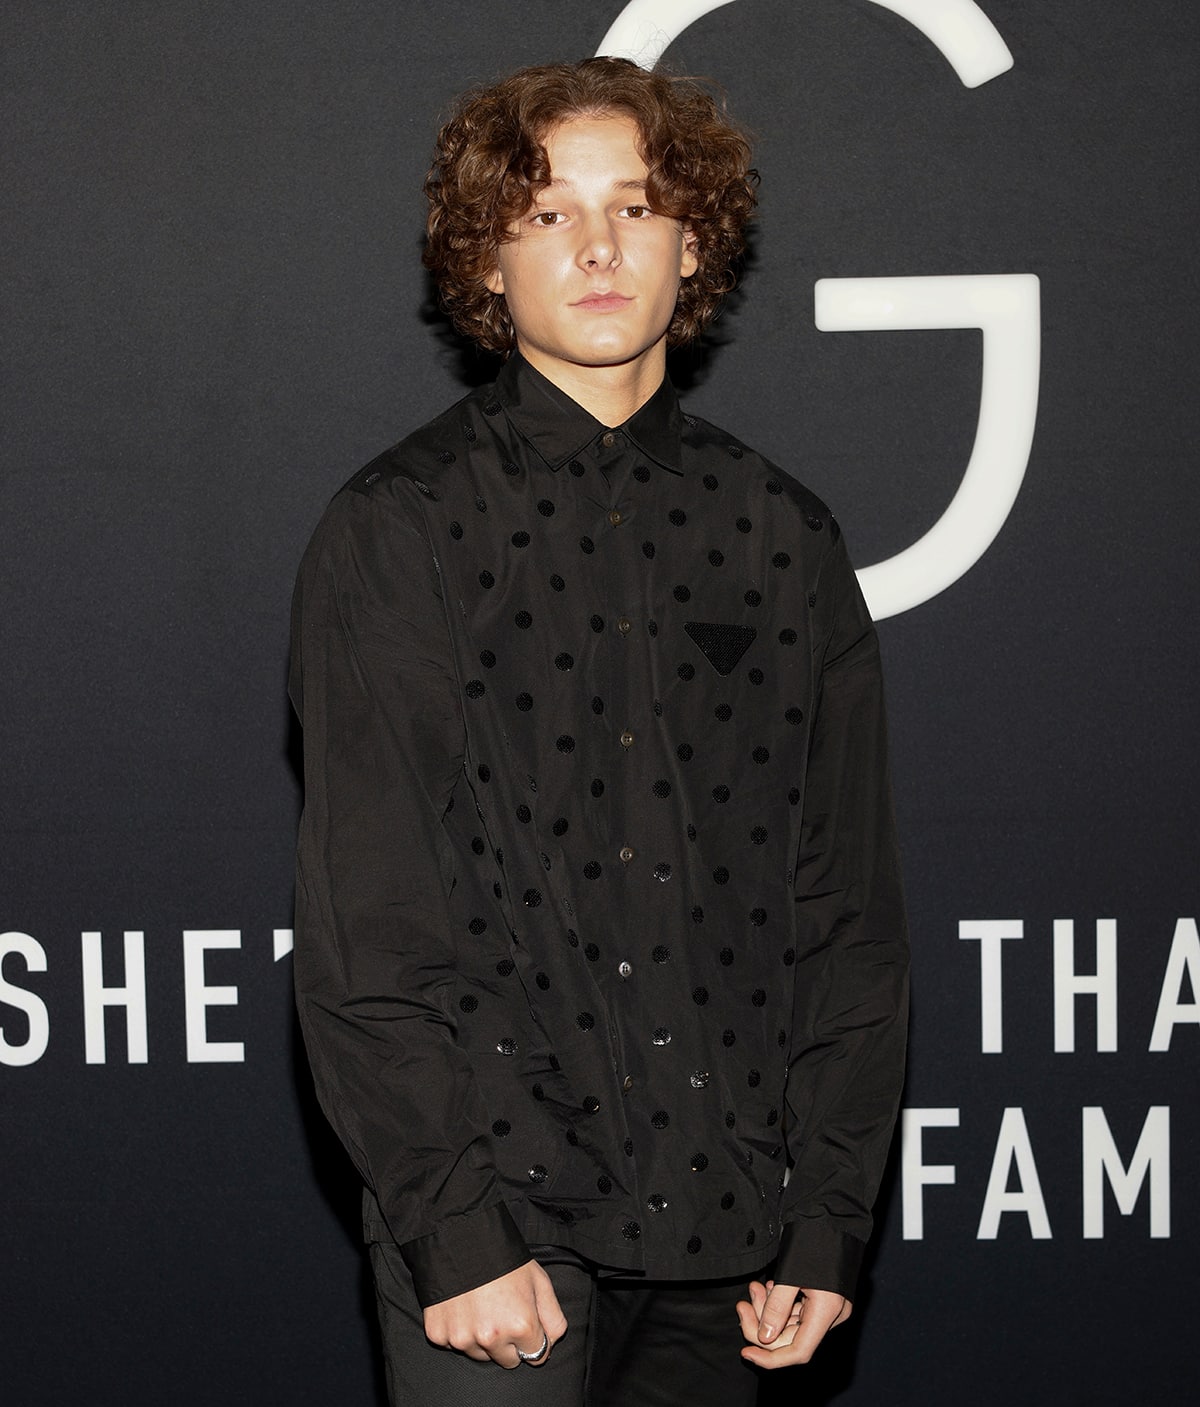 Young actor Mason Thames, pictured at the M3GAN premiere on December 7, 2022, has received much recognition for starring alongside Ethan Hawke in The Black Phone